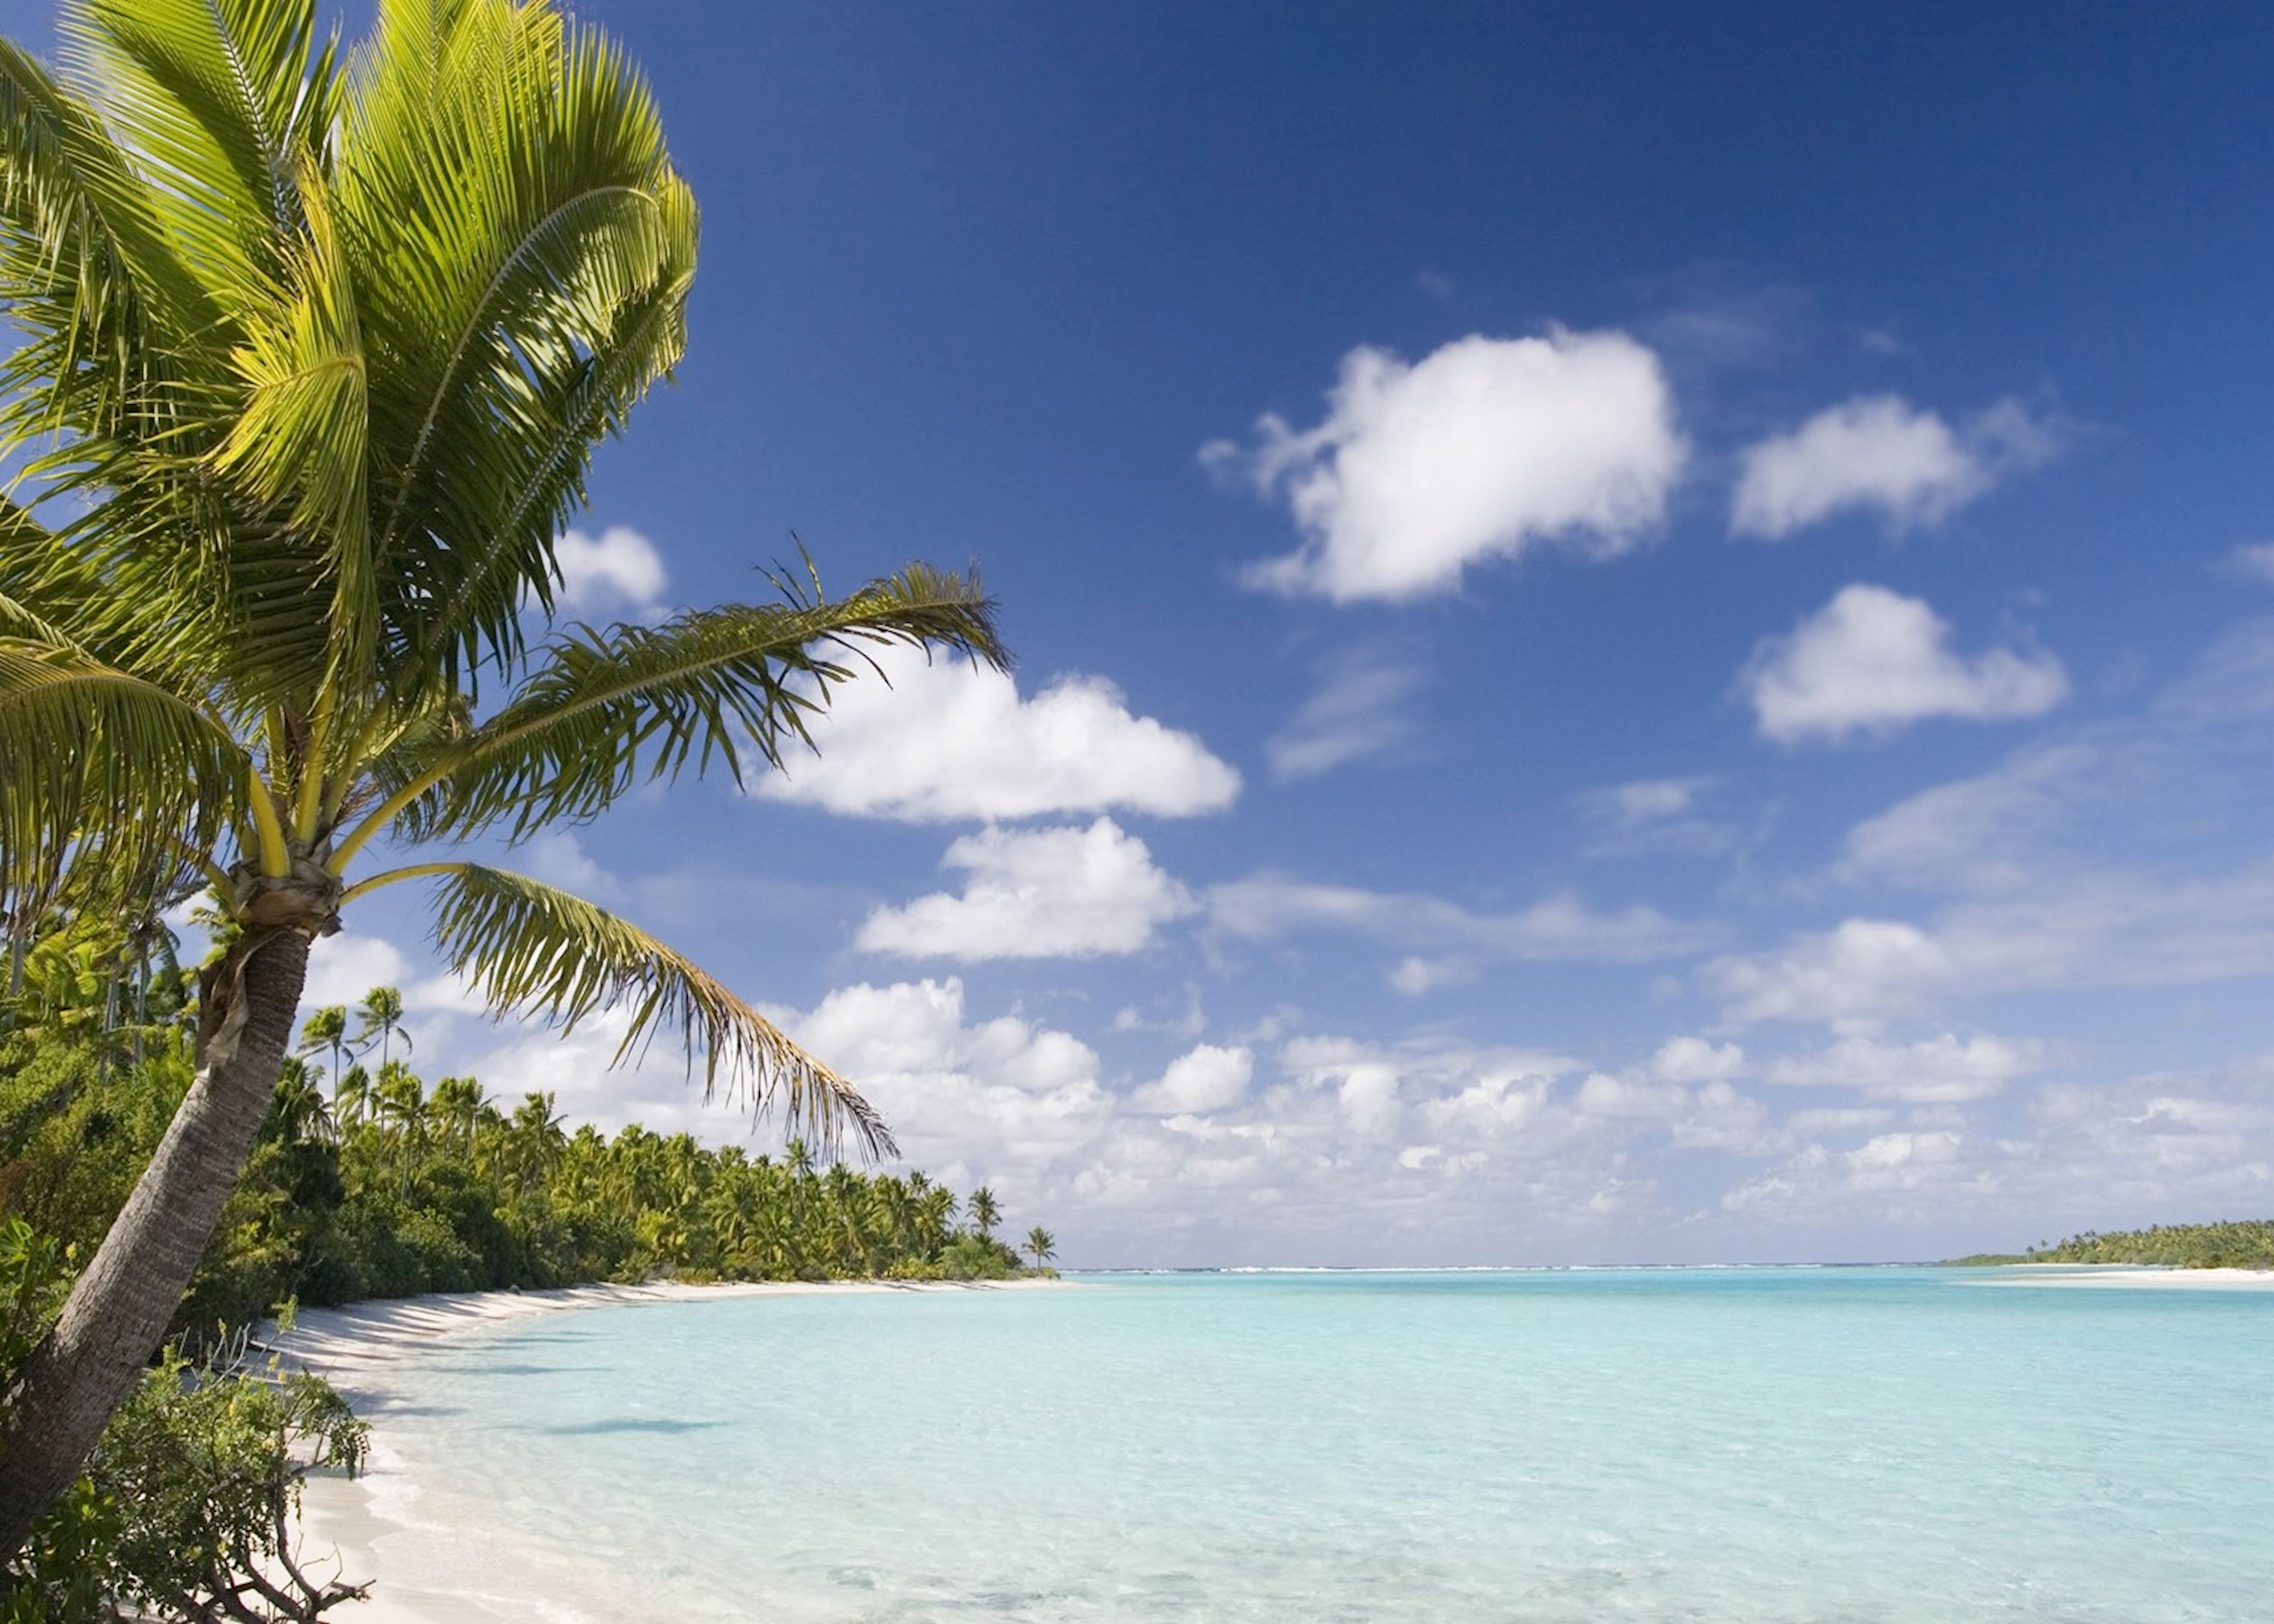 Day Trip to Aitutaki, The Cook Islands | Audley Travel UK